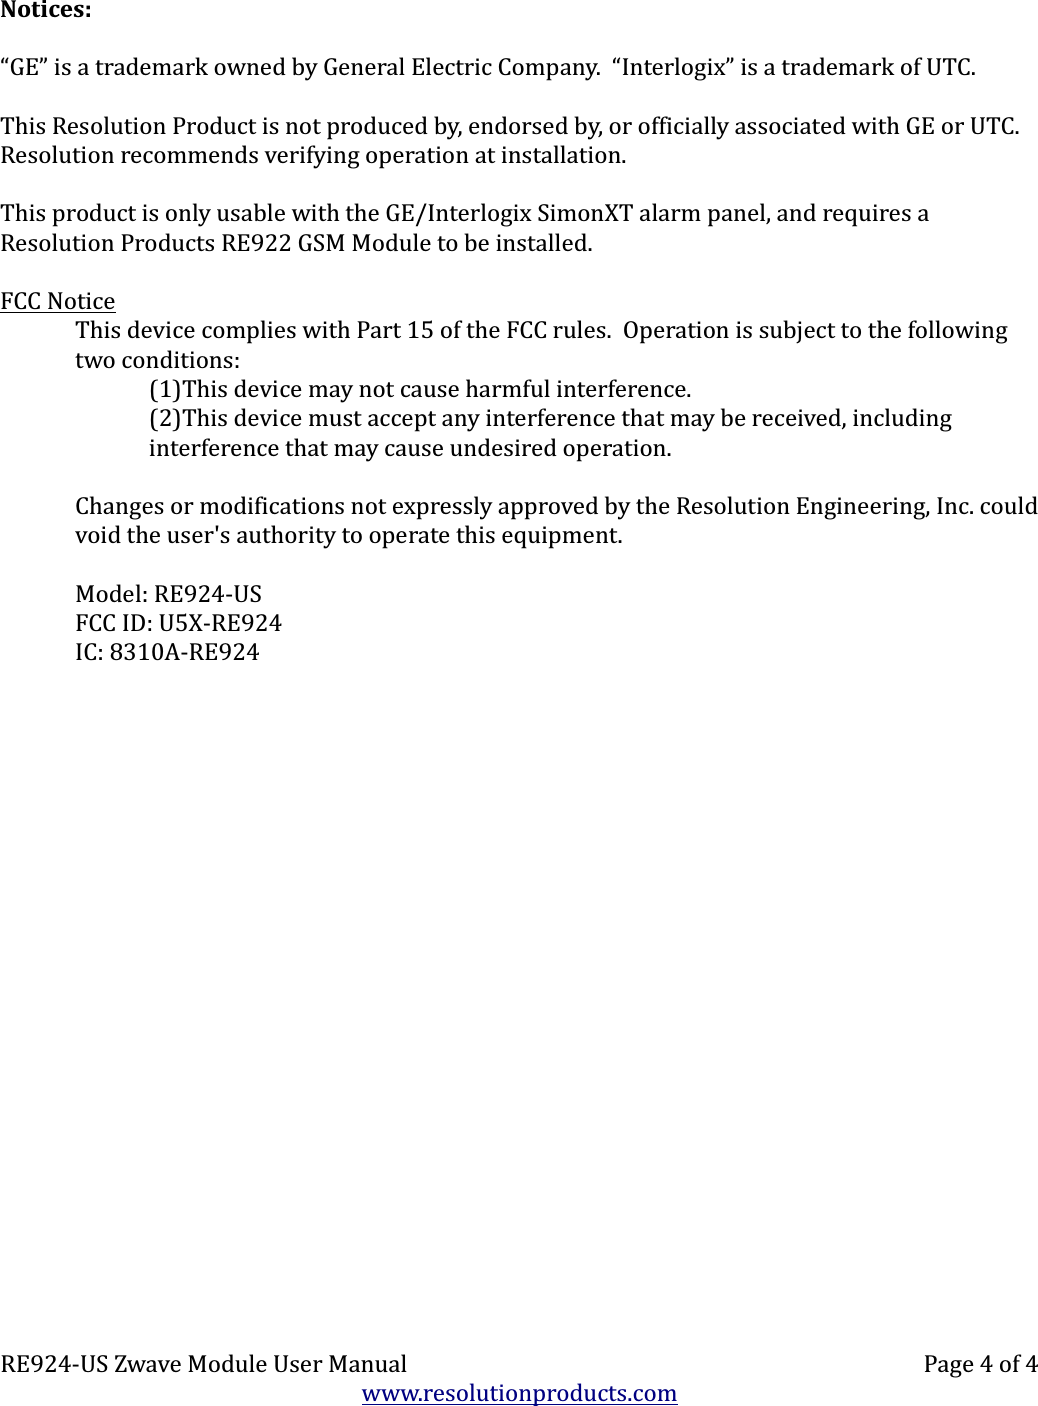 Notices:“GE” is a trademark owned by General Electric Company.  “Interlogix” is a trademark of UTC.This Resolution Product is not produced by, endorsed by, or officially associated with GE or UTC.  Resolution recommends verifying operation at installation.This product is only usable with the GE/Interlogix SimonXT alarm panel, and requires a Resolution Products RE922 GSM Module to be installed.FCC NoticeThis device complies with Part 15 of the FCC rules.  Operation is subject to the following two conditions:(1)This device may not cause harmful interference.(2)This device must accept any interference that may be received, includinginterference that may cause undesired operation.Changes or modifications not expressly approved by the Resolution Engineering, Inc. could void the user&apos;s authority to operate this equipment.Model: RE924-USFCC ID: U5X-RE924IC: 8310A-RE924RE924-US Zwave Module User Manual Page 4 of 4www.resolutionproducts.com